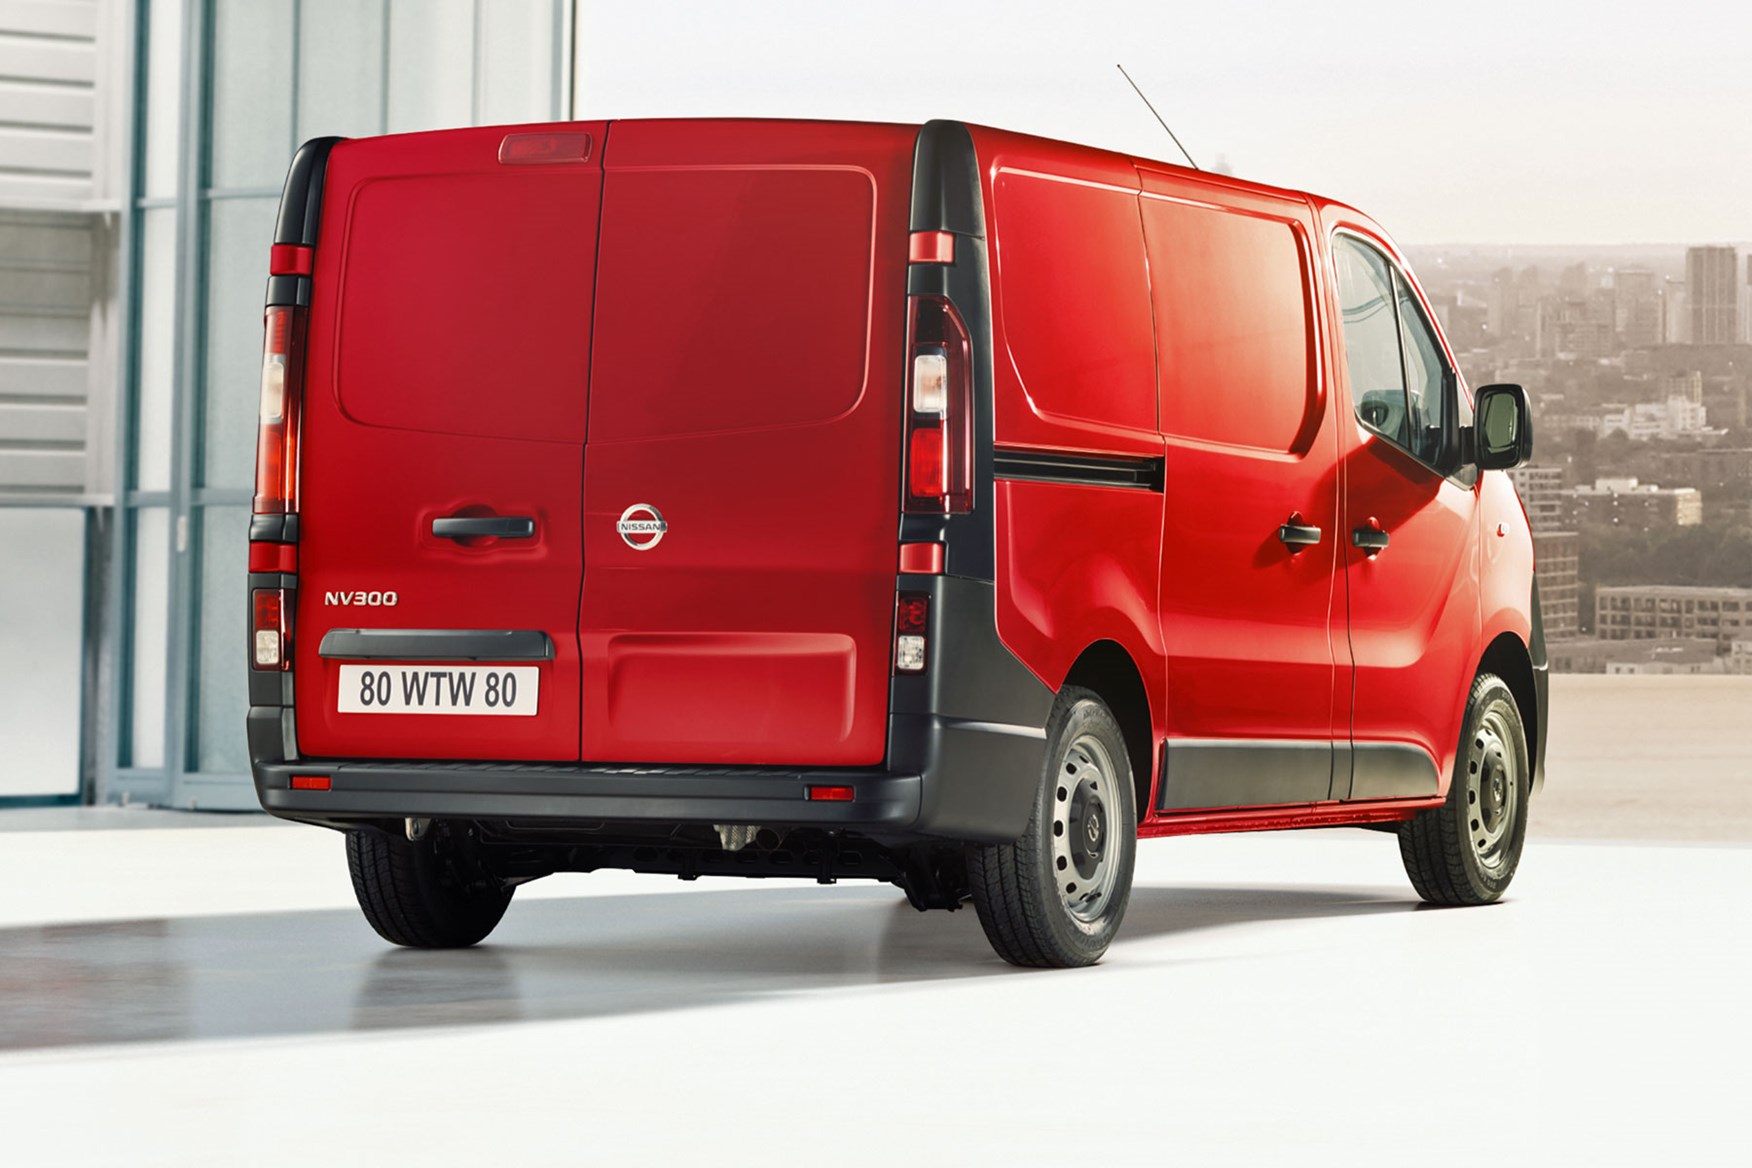 Nissan NV300 - red, rear view, 2019 update model